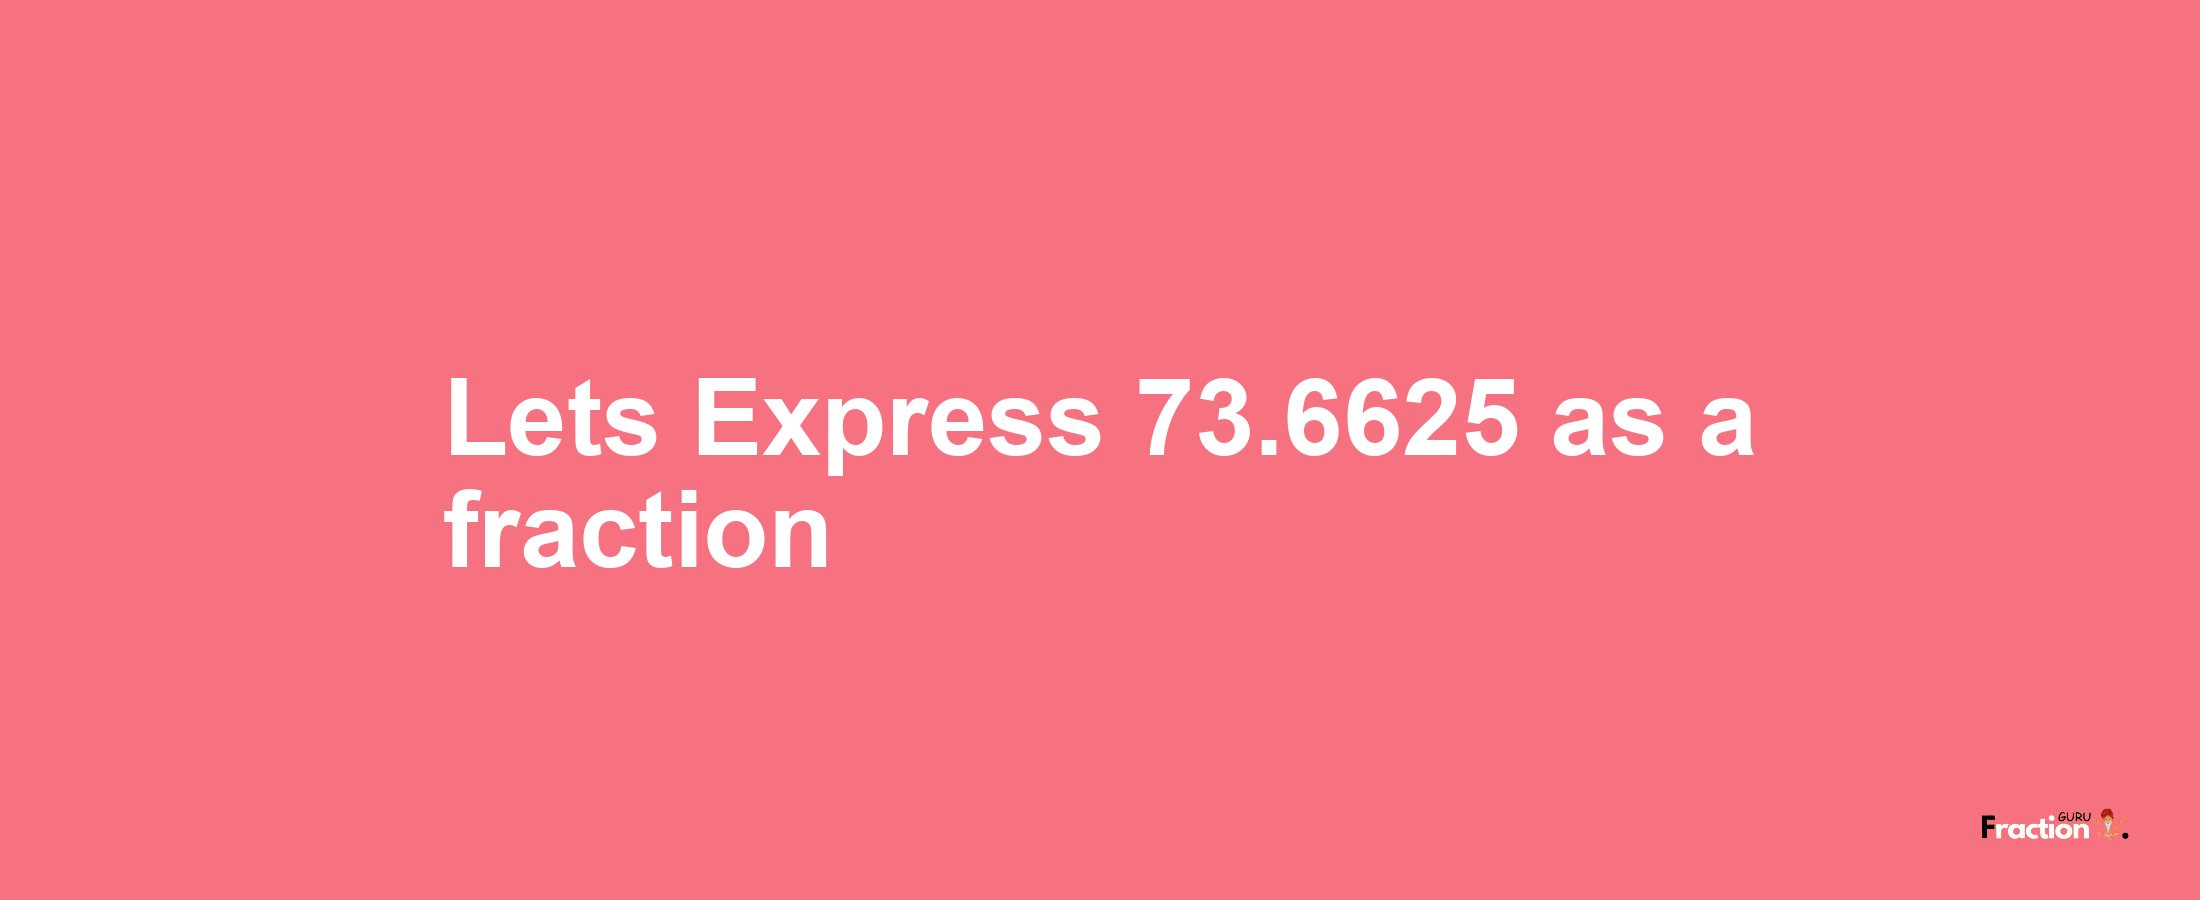 Lets Express 73.6625 as afraction